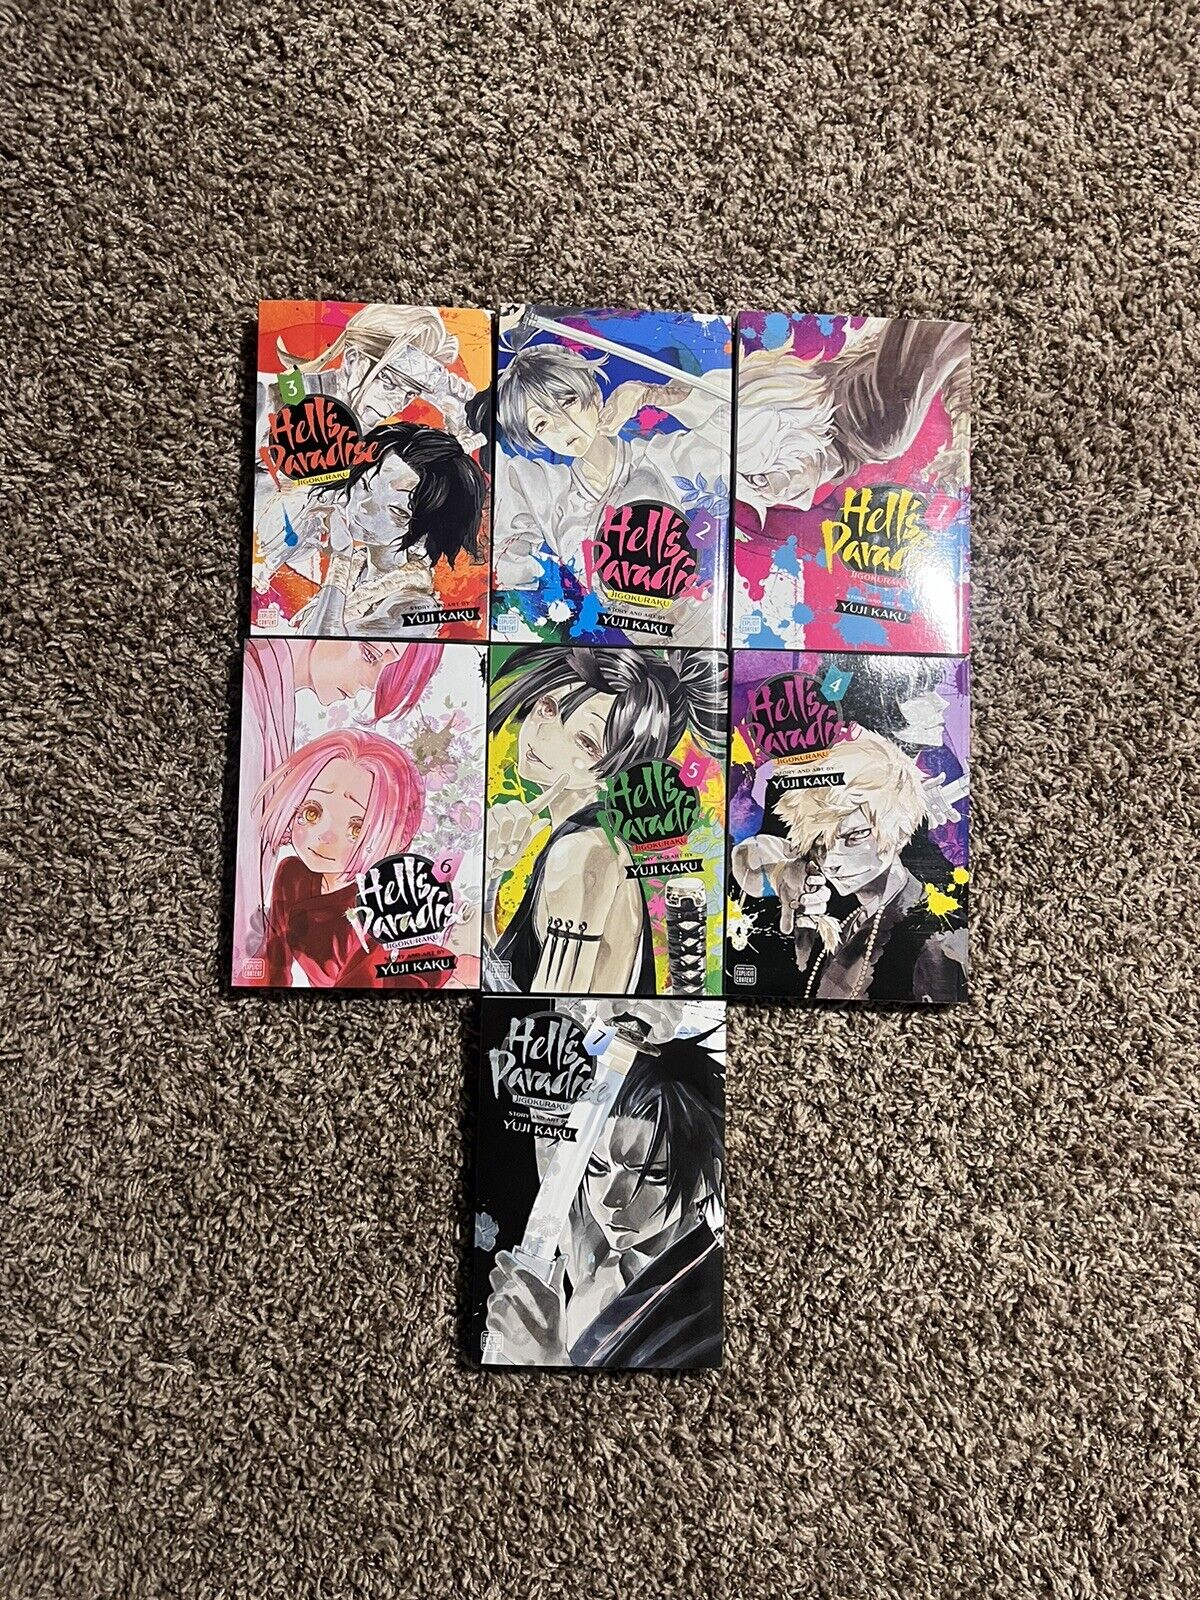 Hell’s Paradise Manga Volumes 1-7 Excellent Condition